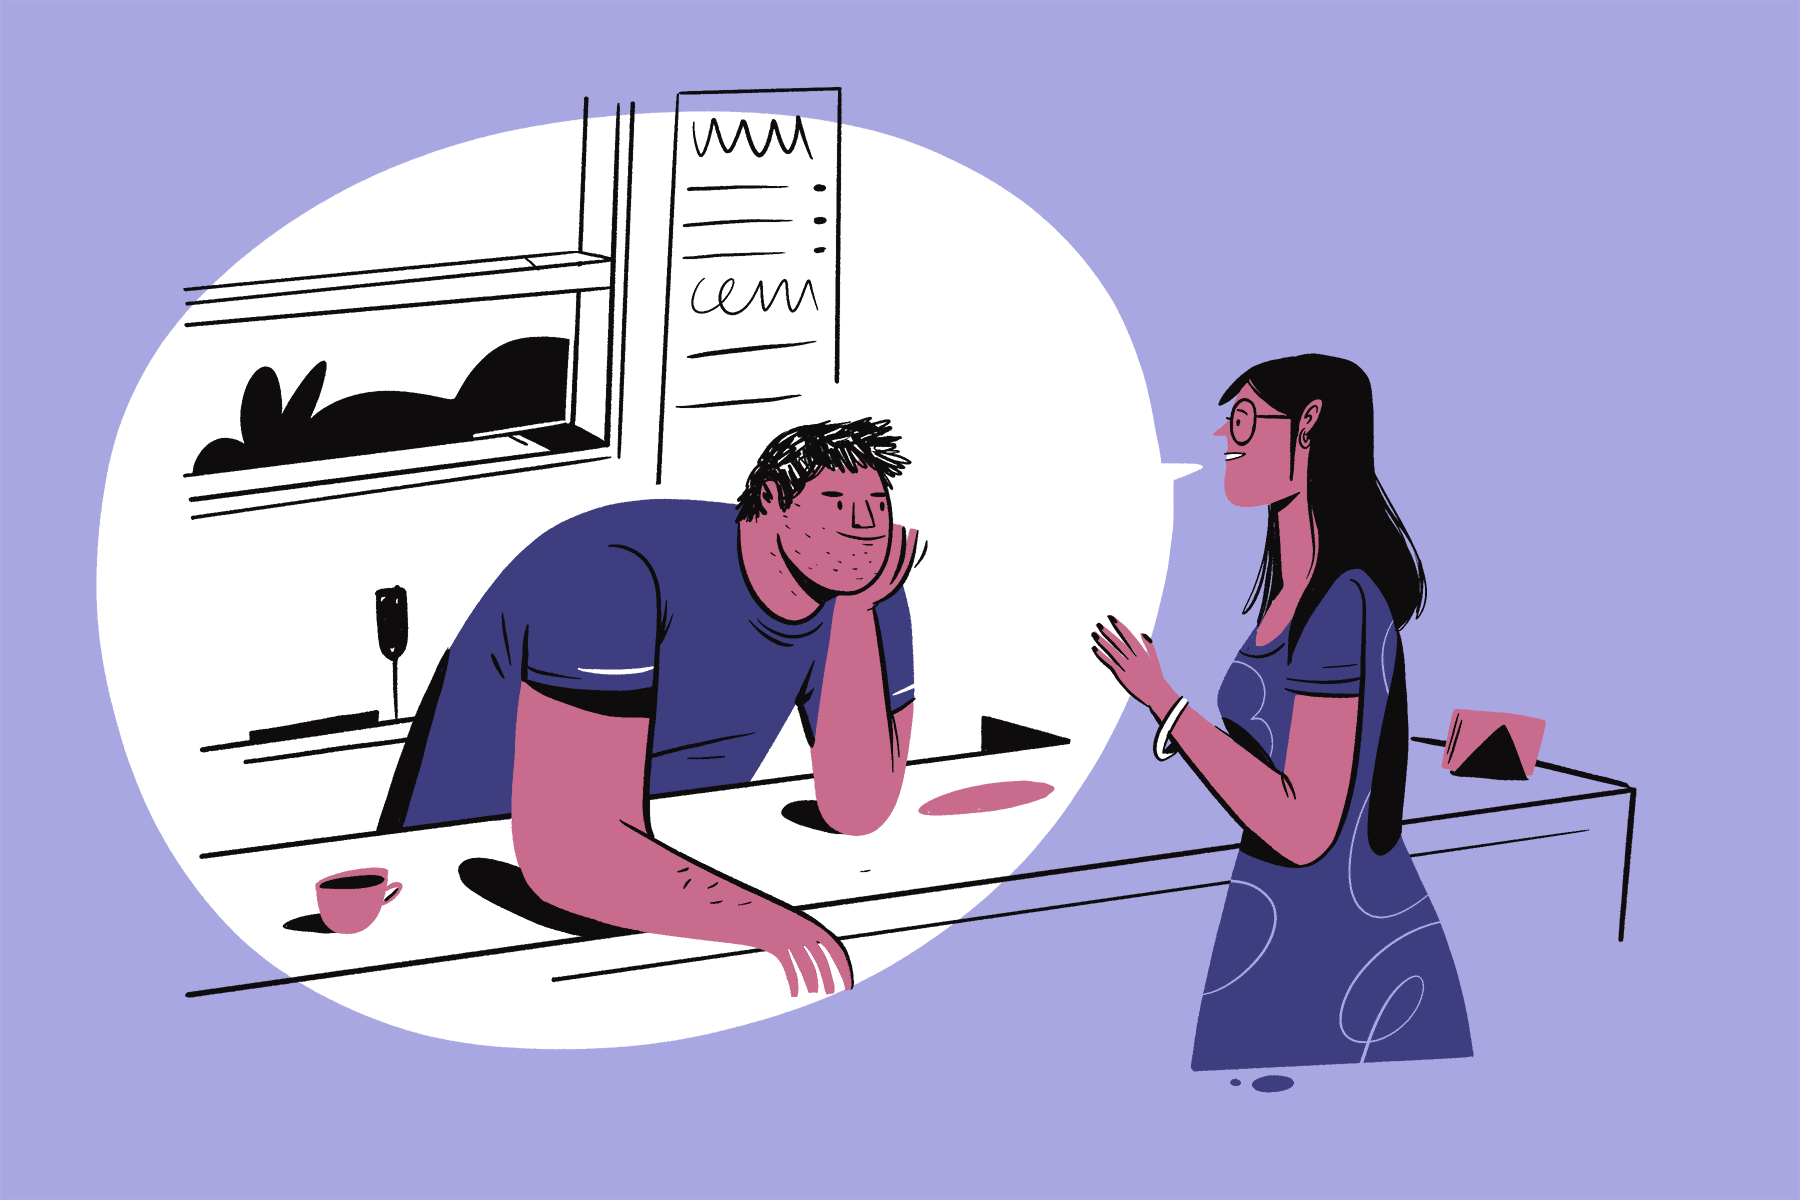 Illustration of woman having a conversation with a man across a counter